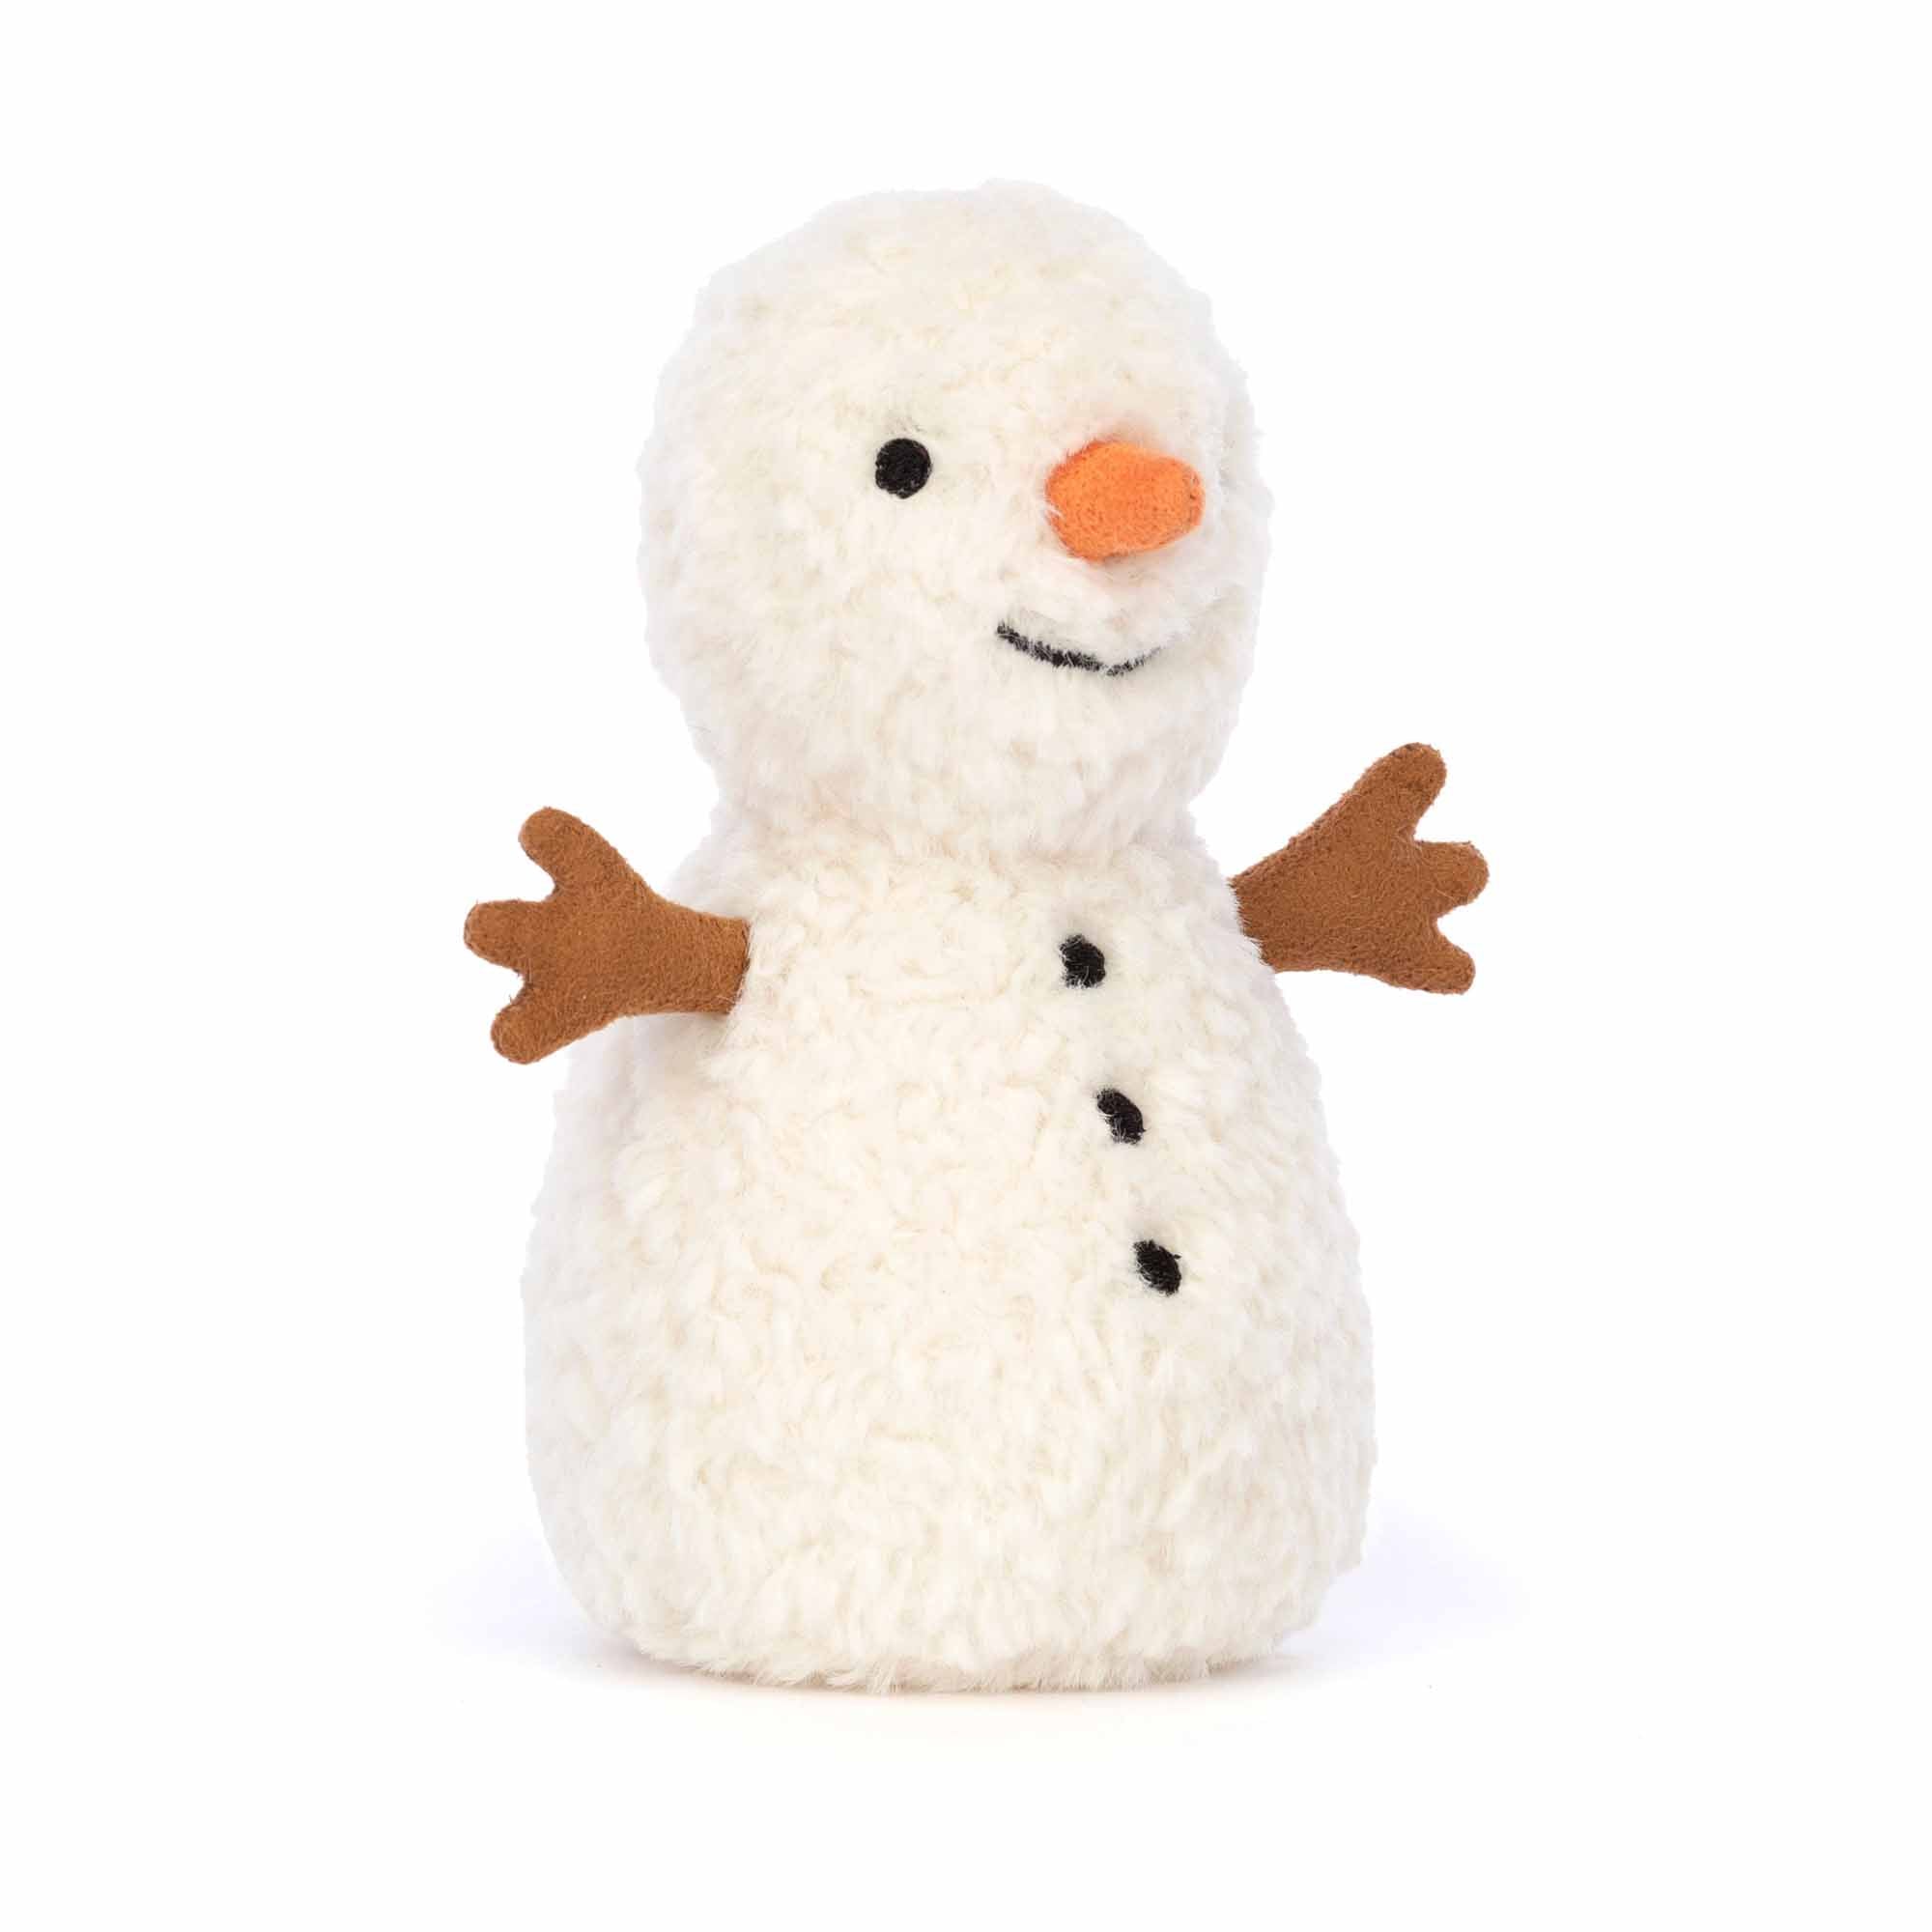 jellycat white fur snowman with black coal eyes and an orange carrot nose